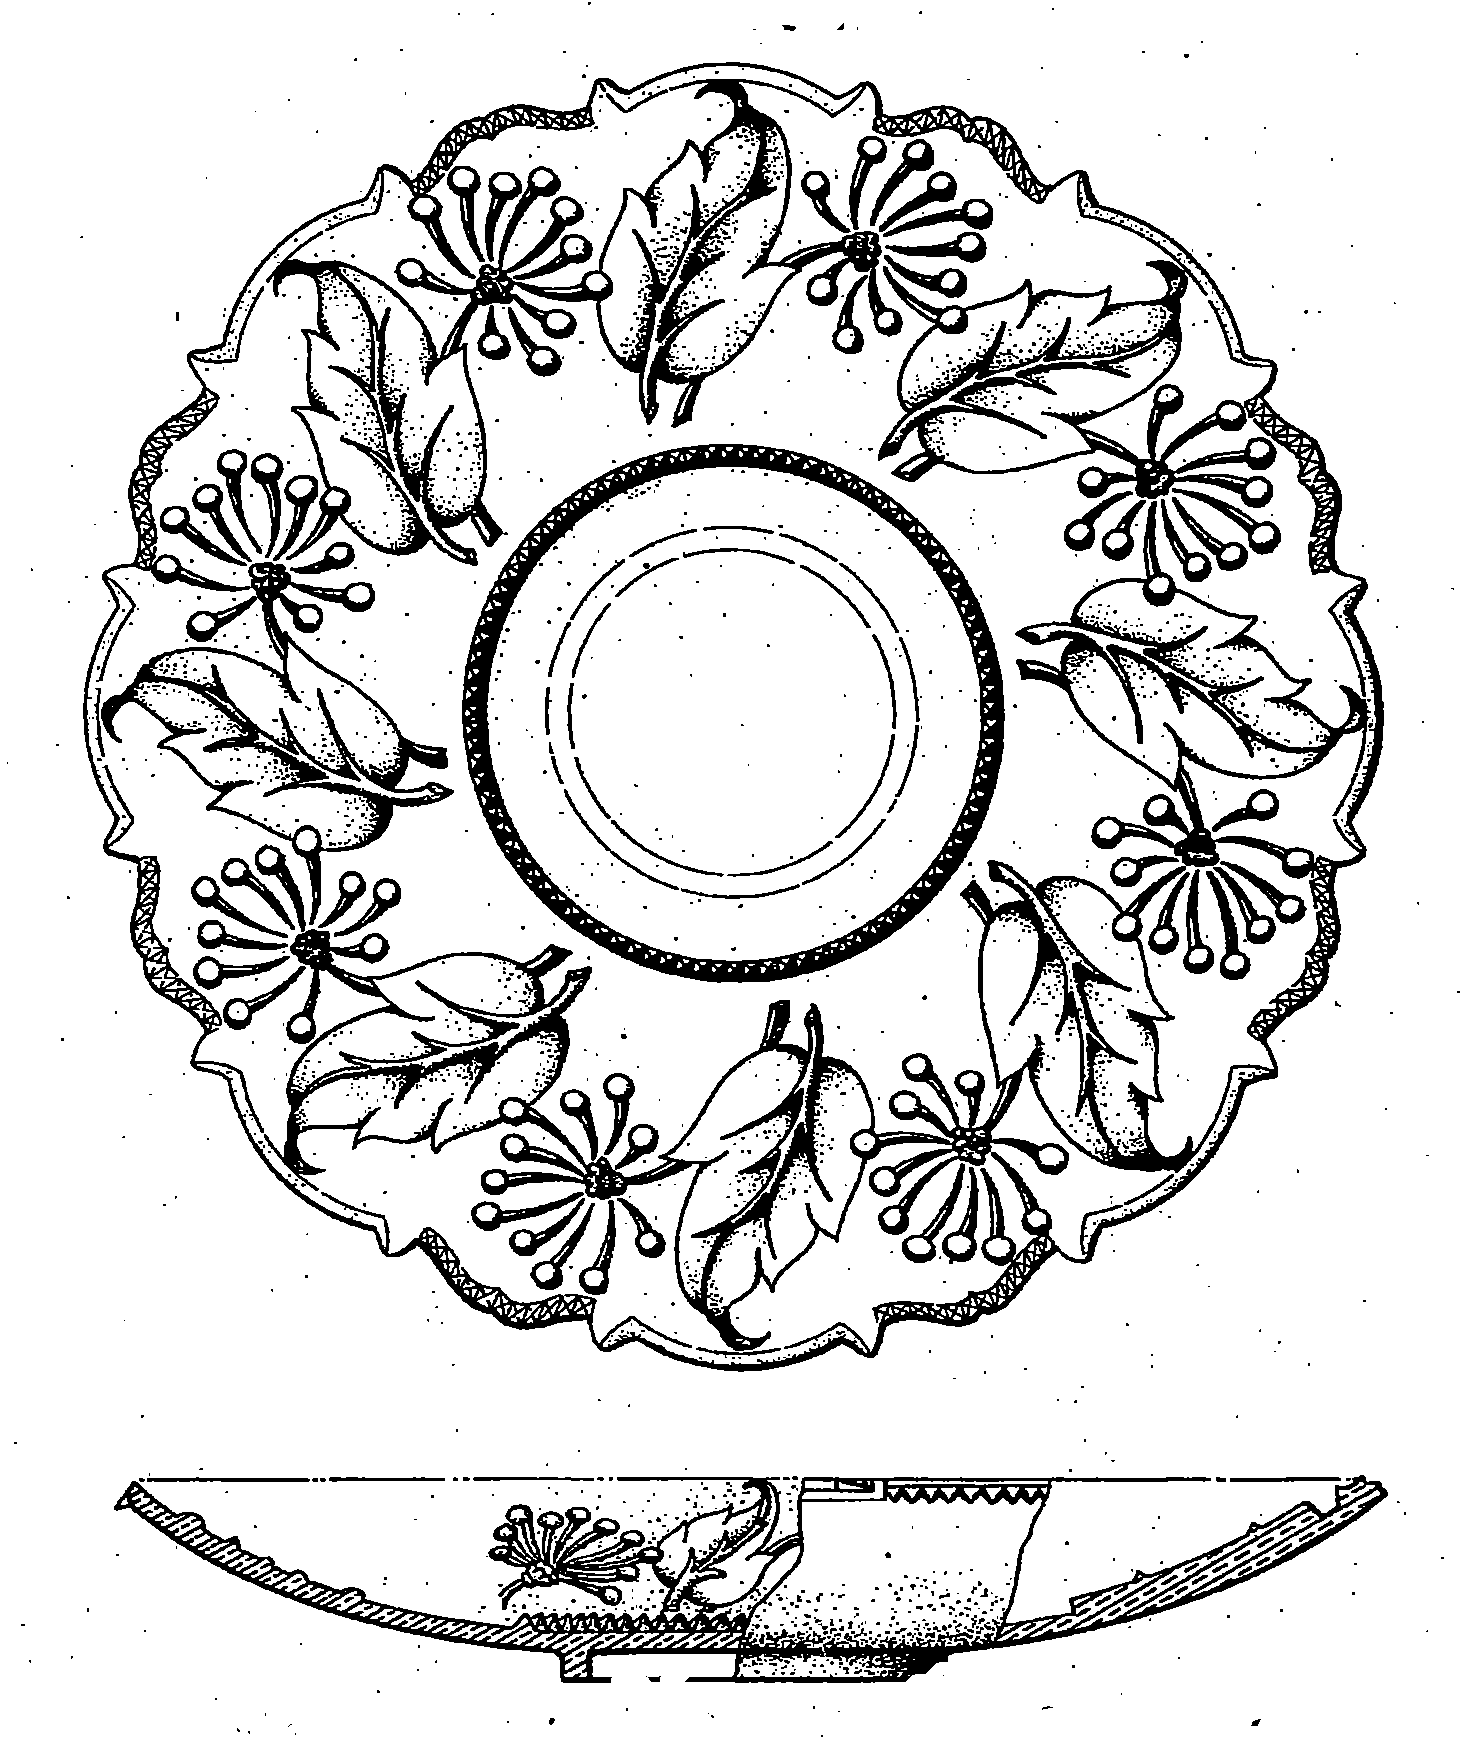 Example of a design for a food server with a scalloped peripheryin top plan and simulative ornamentation and three or more repeatsabout axis. 
